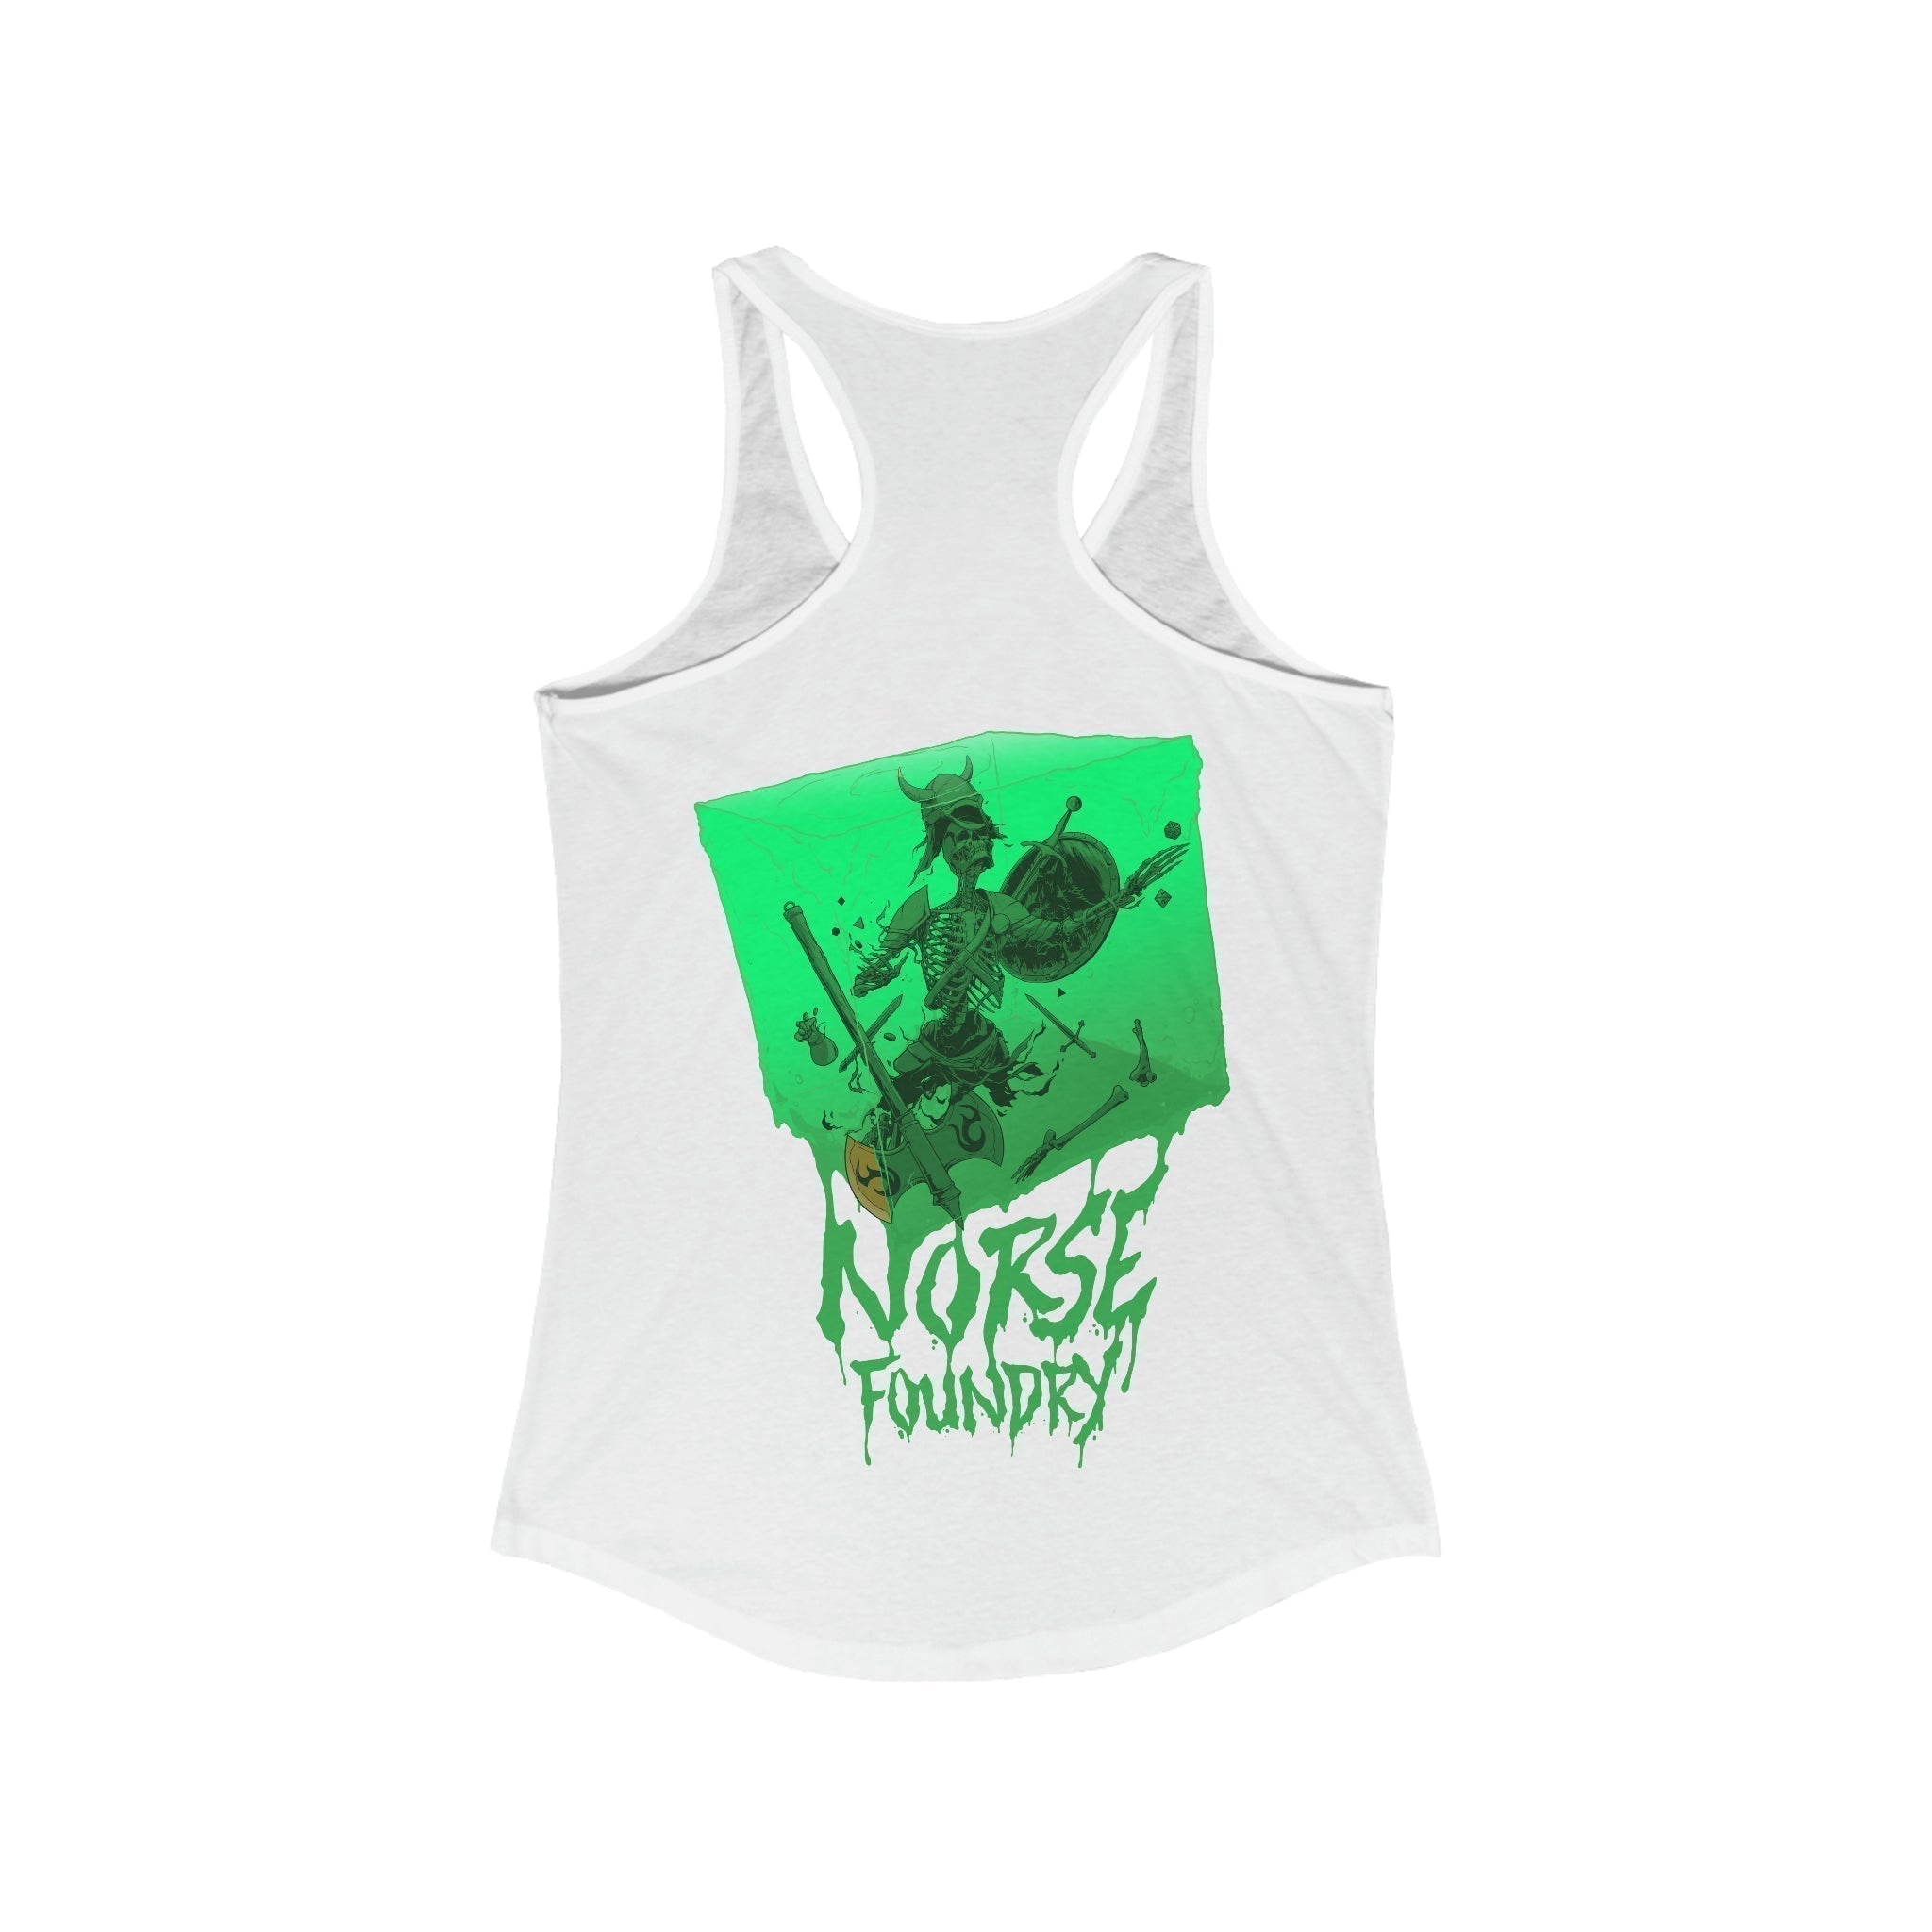 Cube - Norse Foundry Women's Tank Top - 29424451027677125145